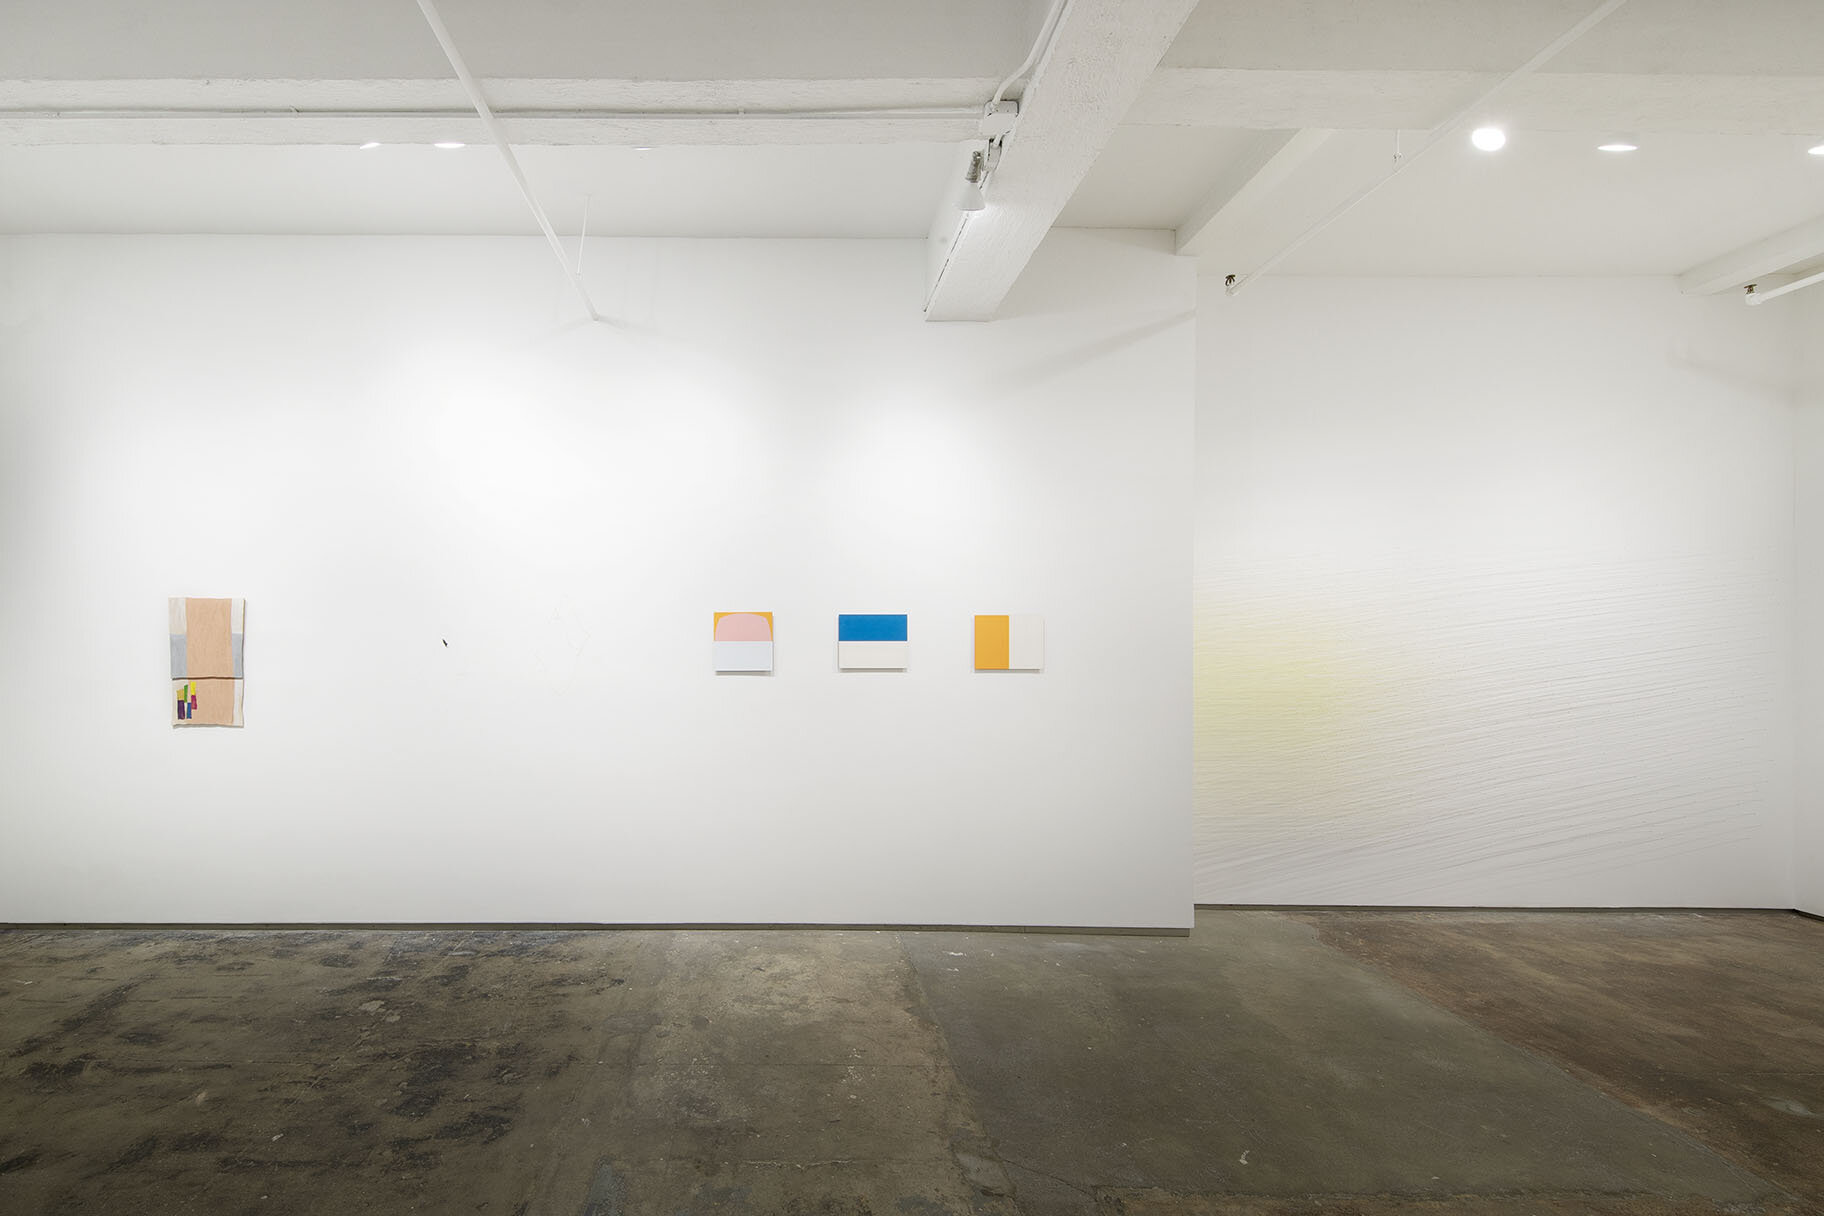   installation view   also pictured: work by Richard Tuttle and Beto De Volder 